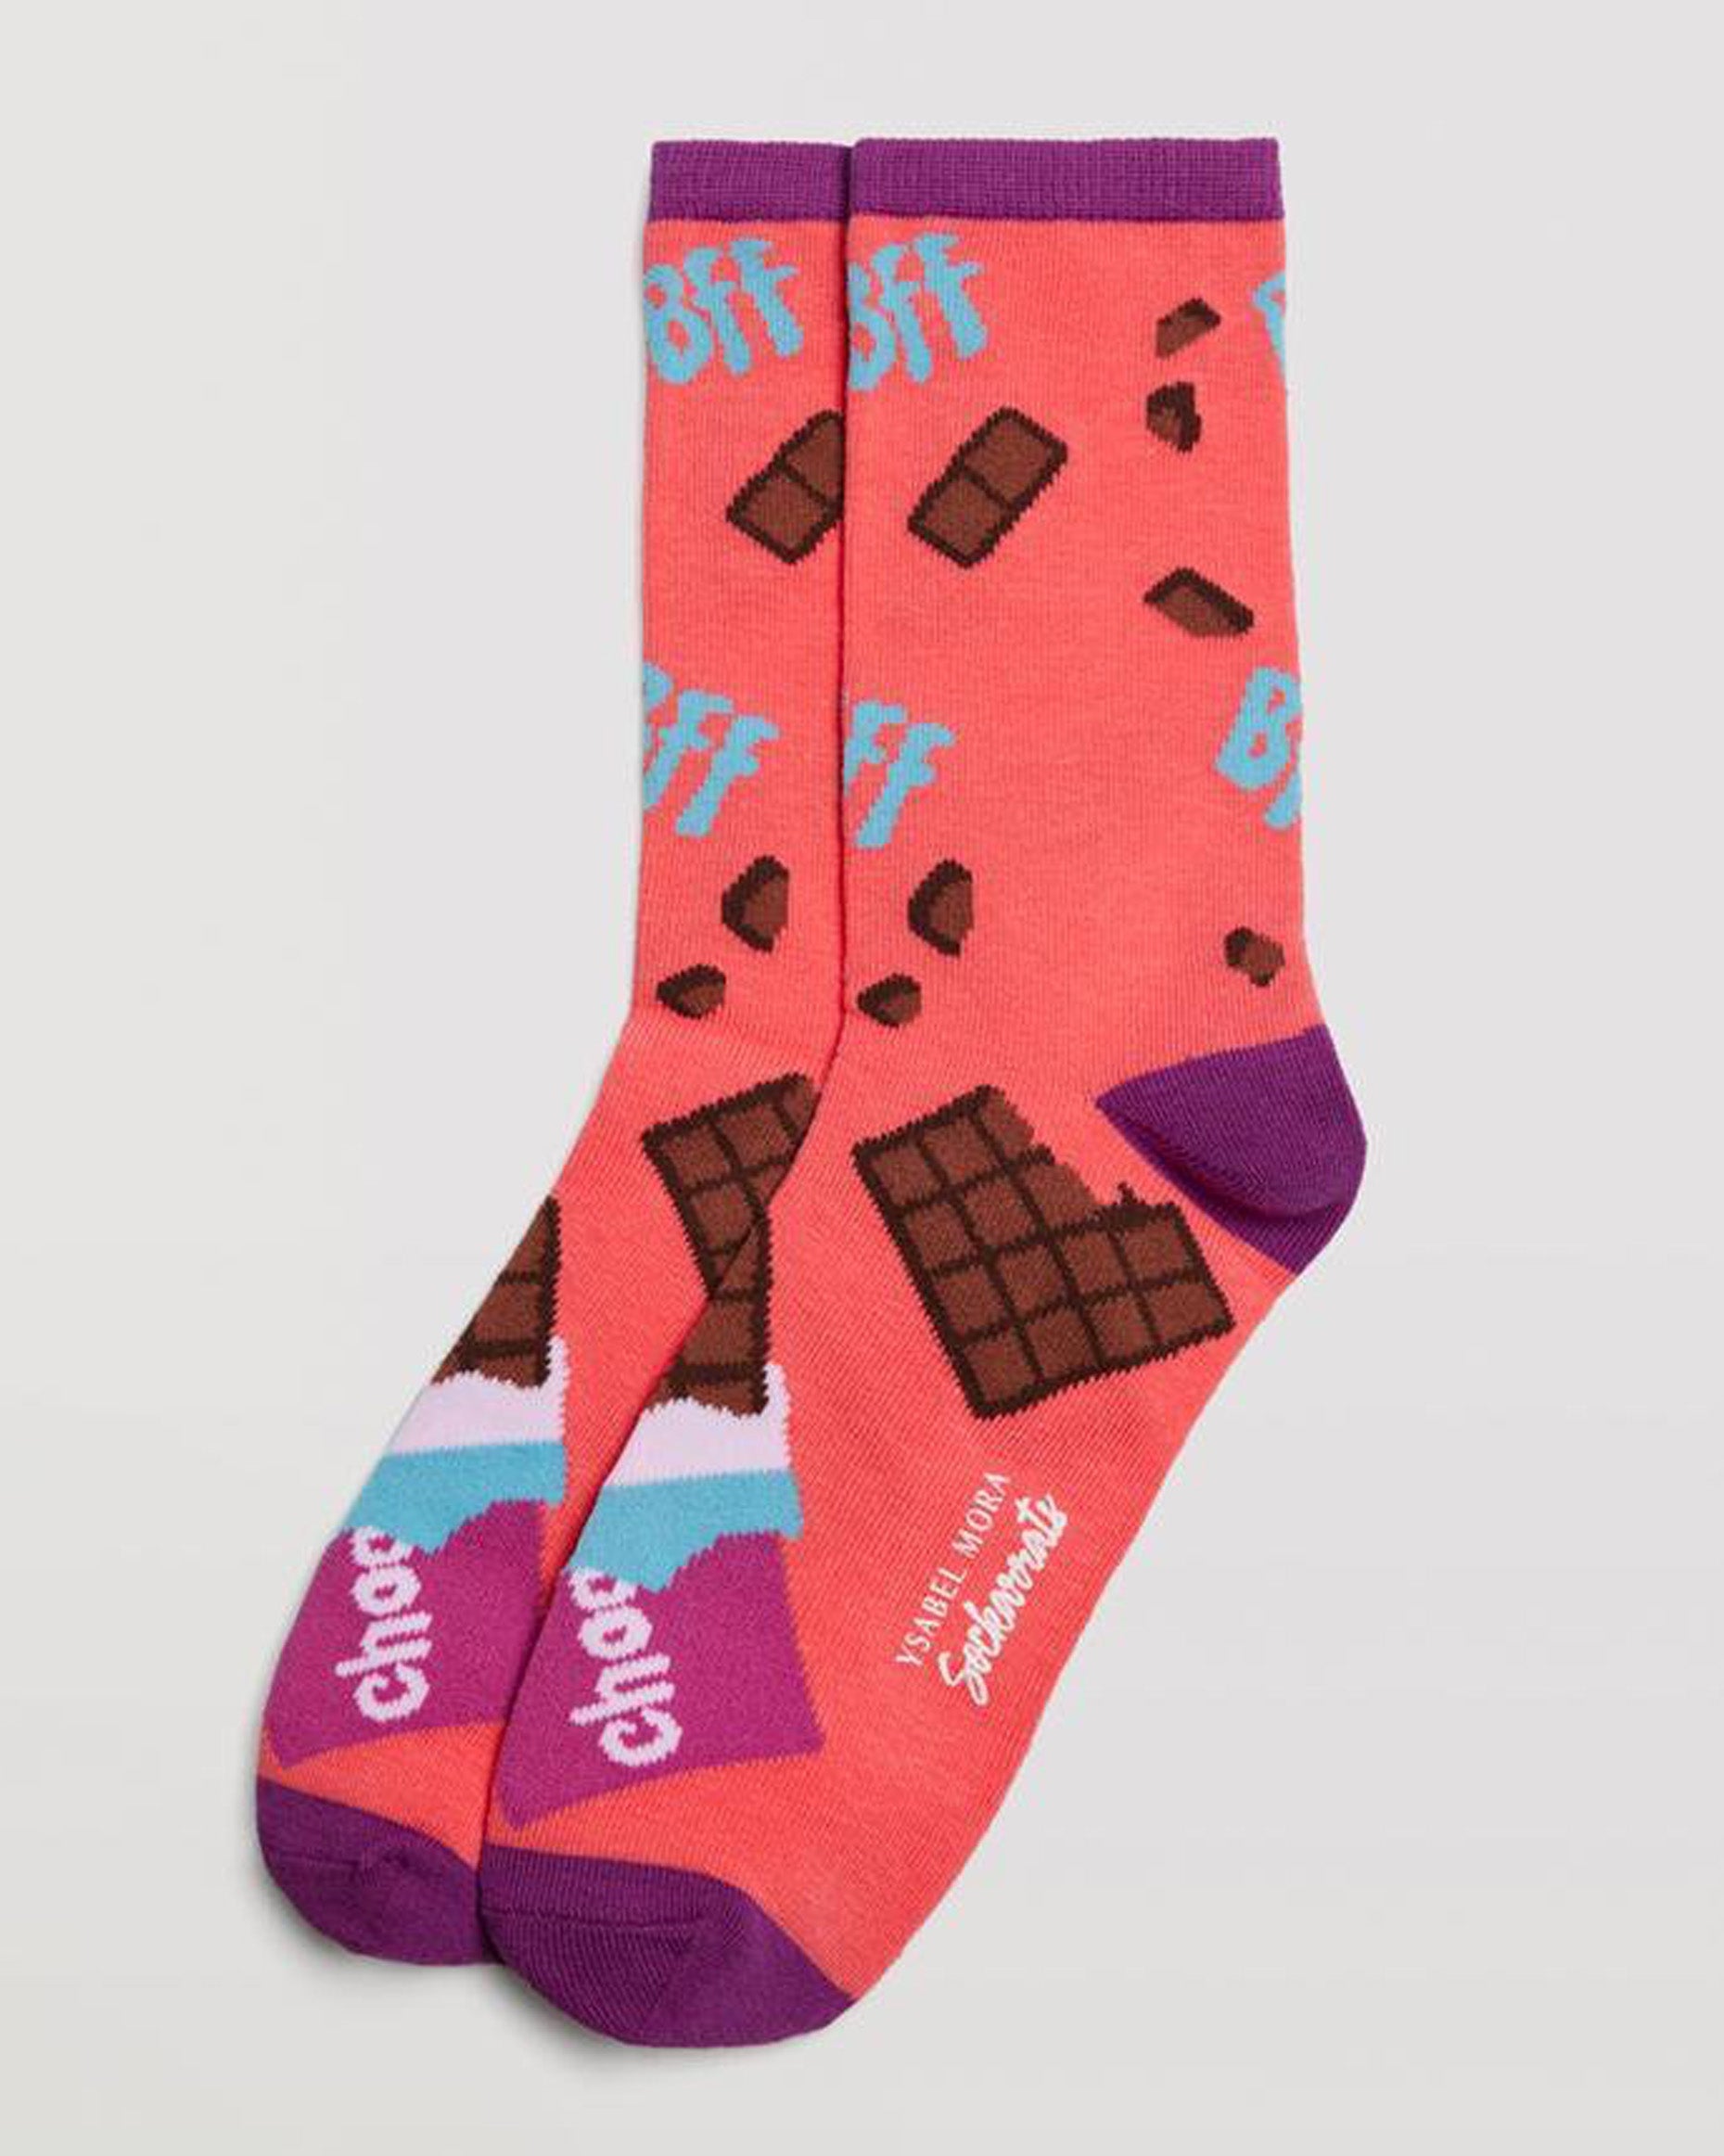 Ysabel Mora 12905 Chocolate Bar Socks - Bright coral coloured cotton socks with an all over pattern of chocolate bars pattern in brown, turquoise, purple and black, purple toe, heel and cuff.